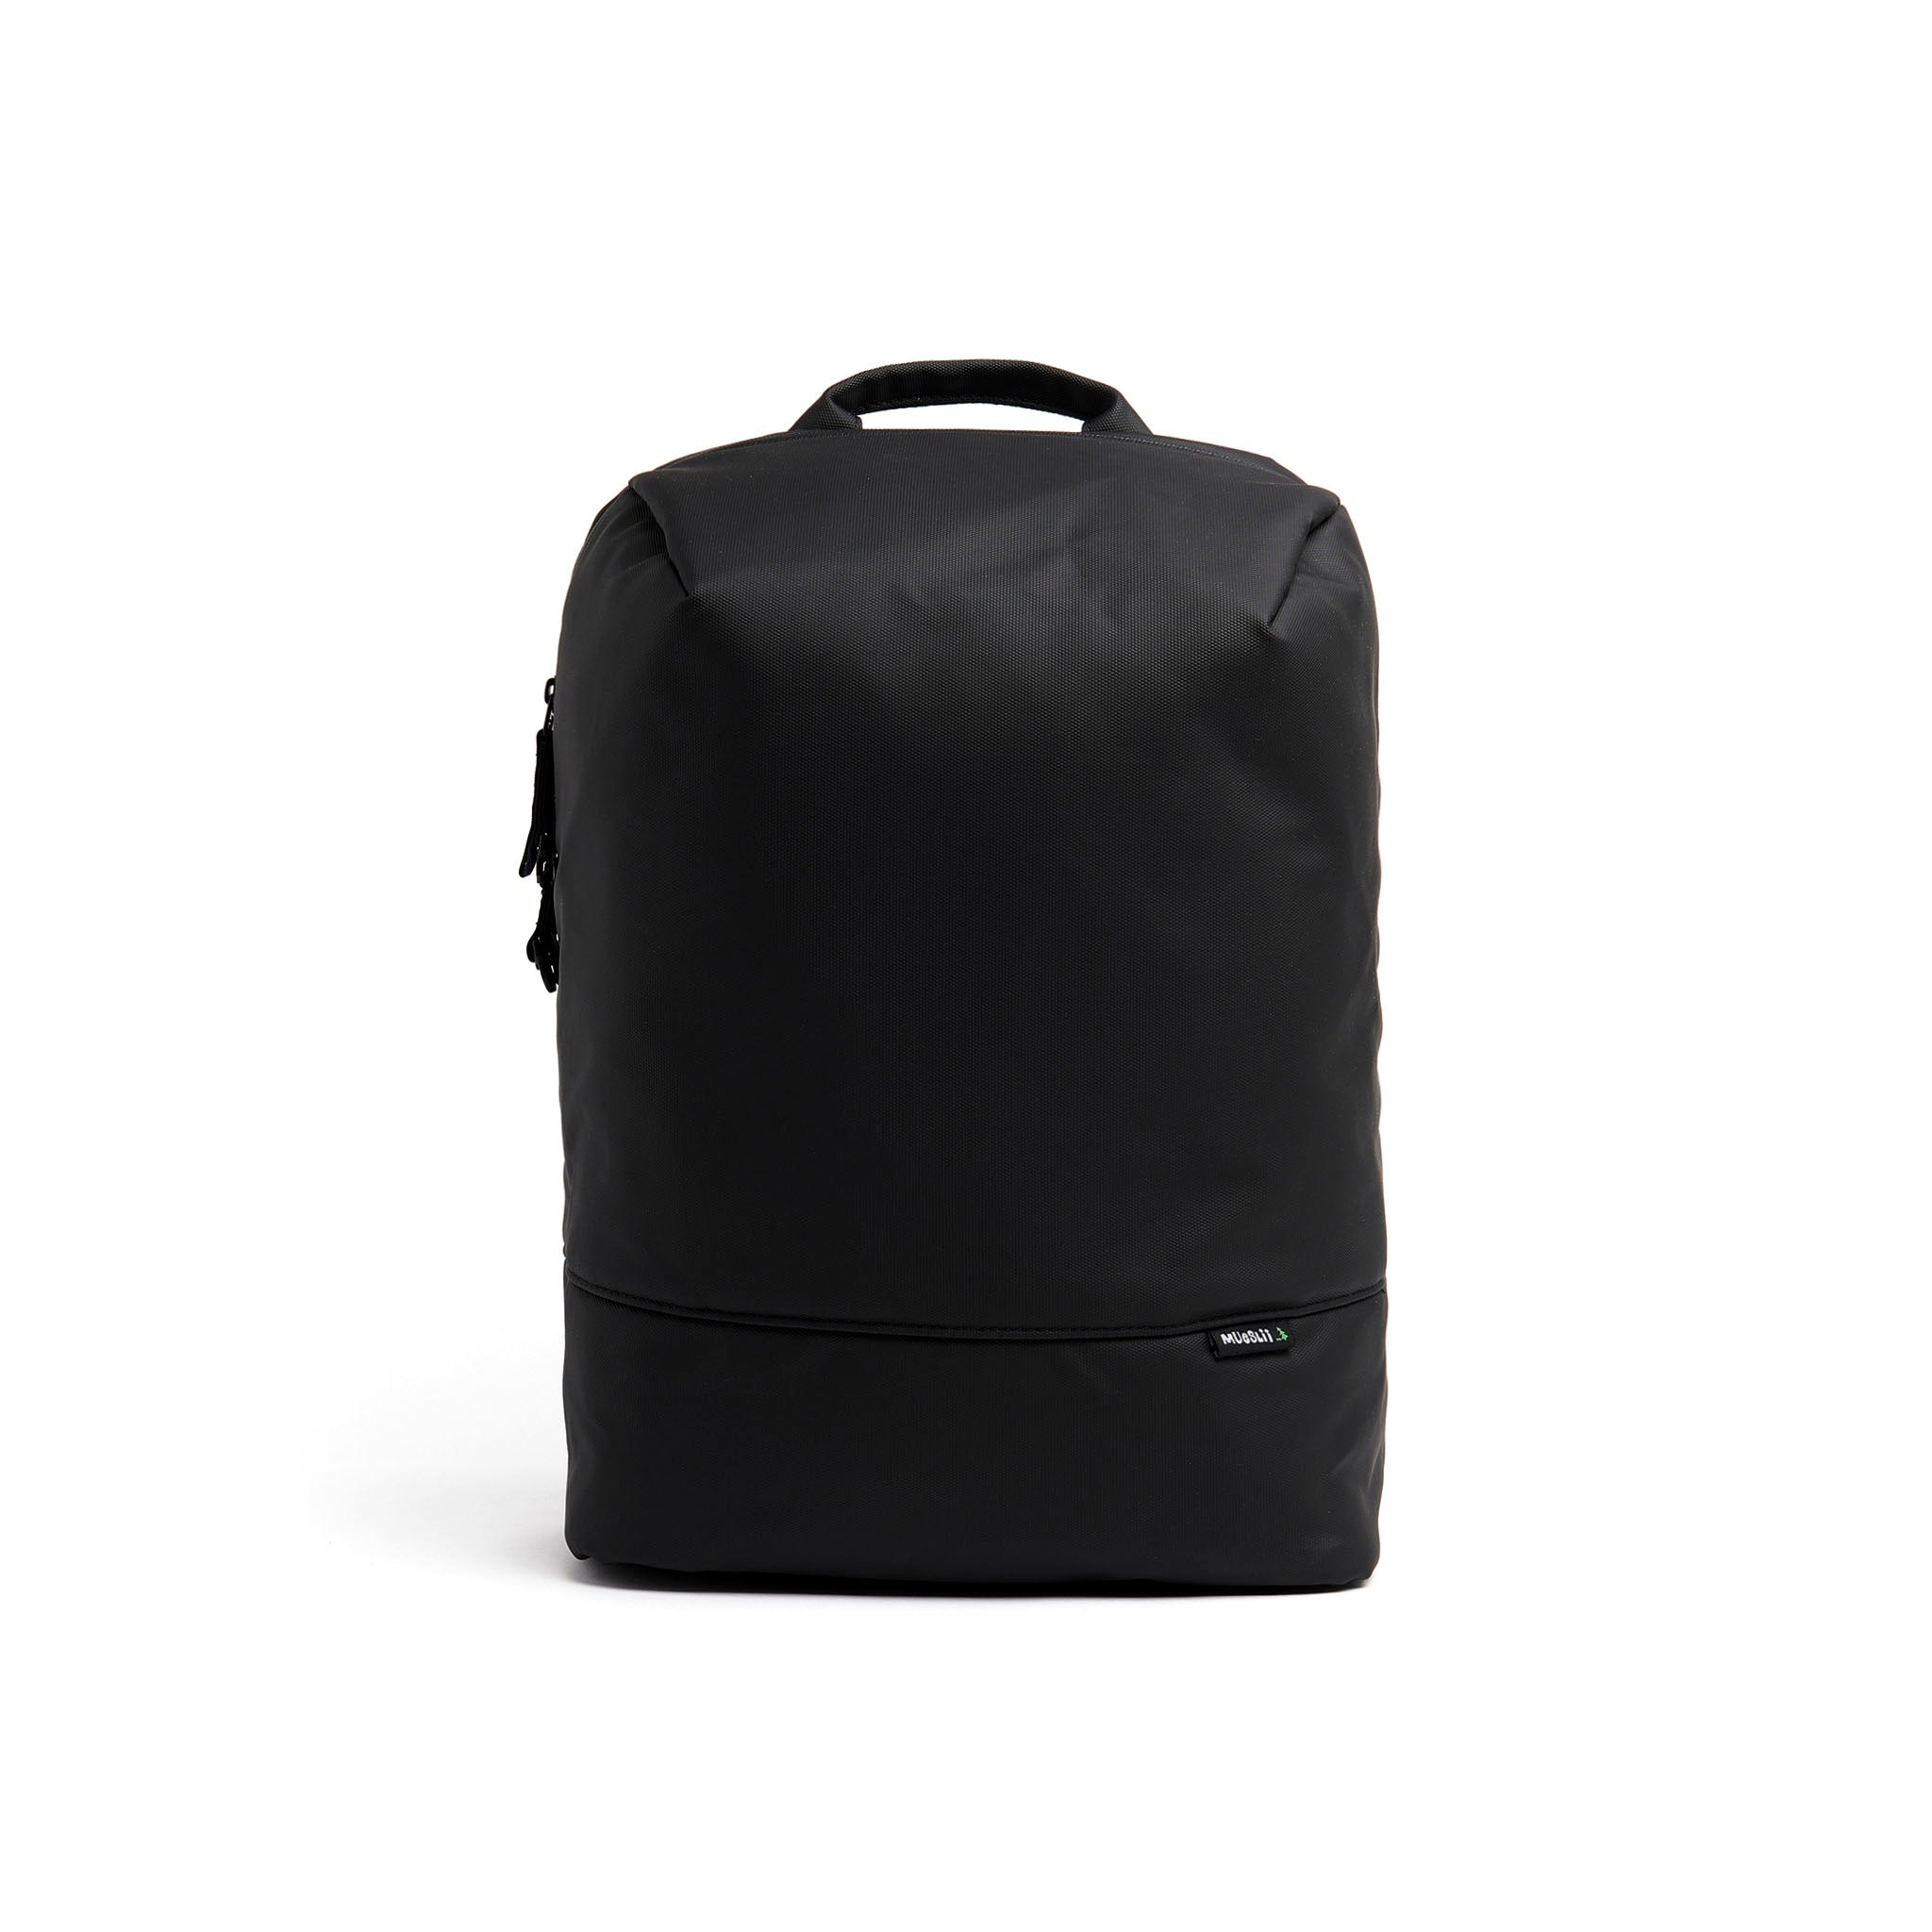 Mueslii travel backpack, made of PU coated waterproof nylon, with a laptop compartment, color coal black, front view.